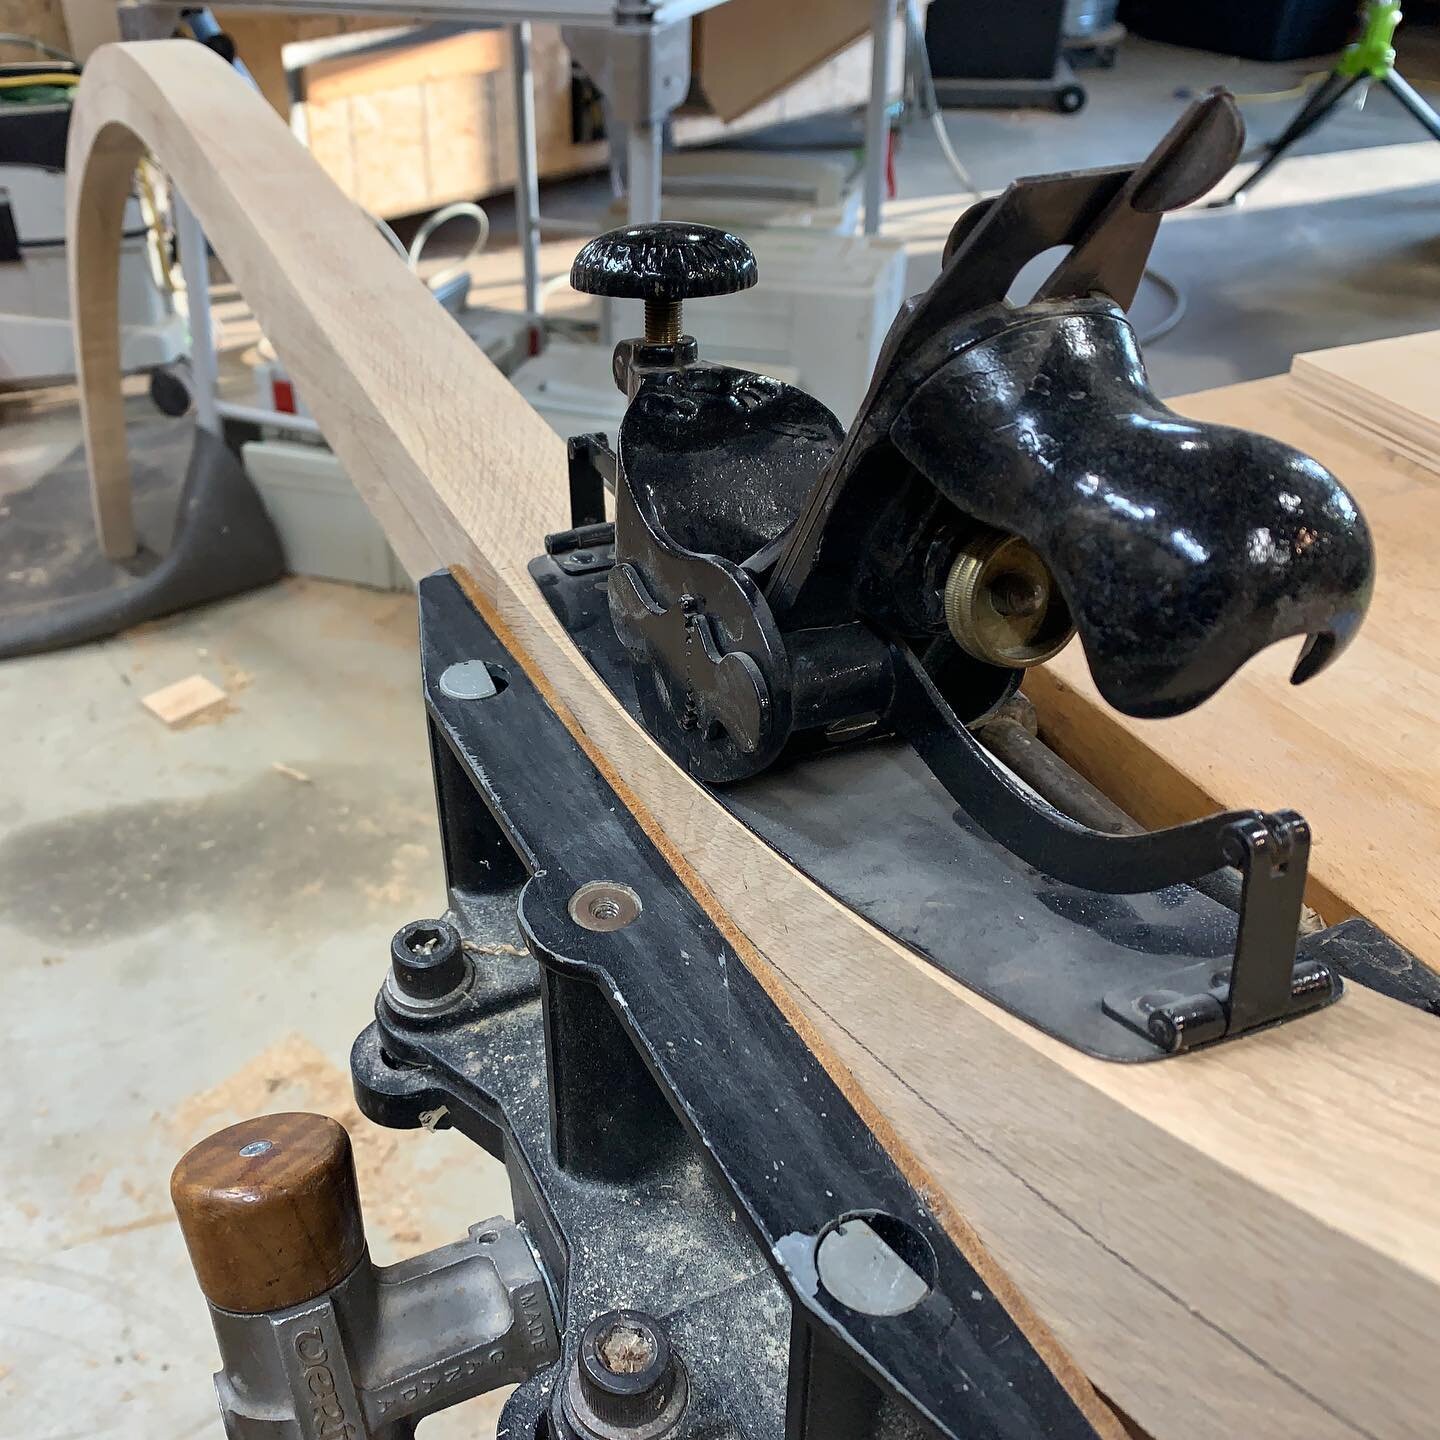 Old Stanley #113 curved plane.  My go to when faring curves on handrail blanks. 
.
.
.
#handrail #stanleyplane #stanley113 #handplane #customhandrail #custom #stairmaker #tuckervise #handcarving #architectualmillwork #woodworking #woodwork #customwoo